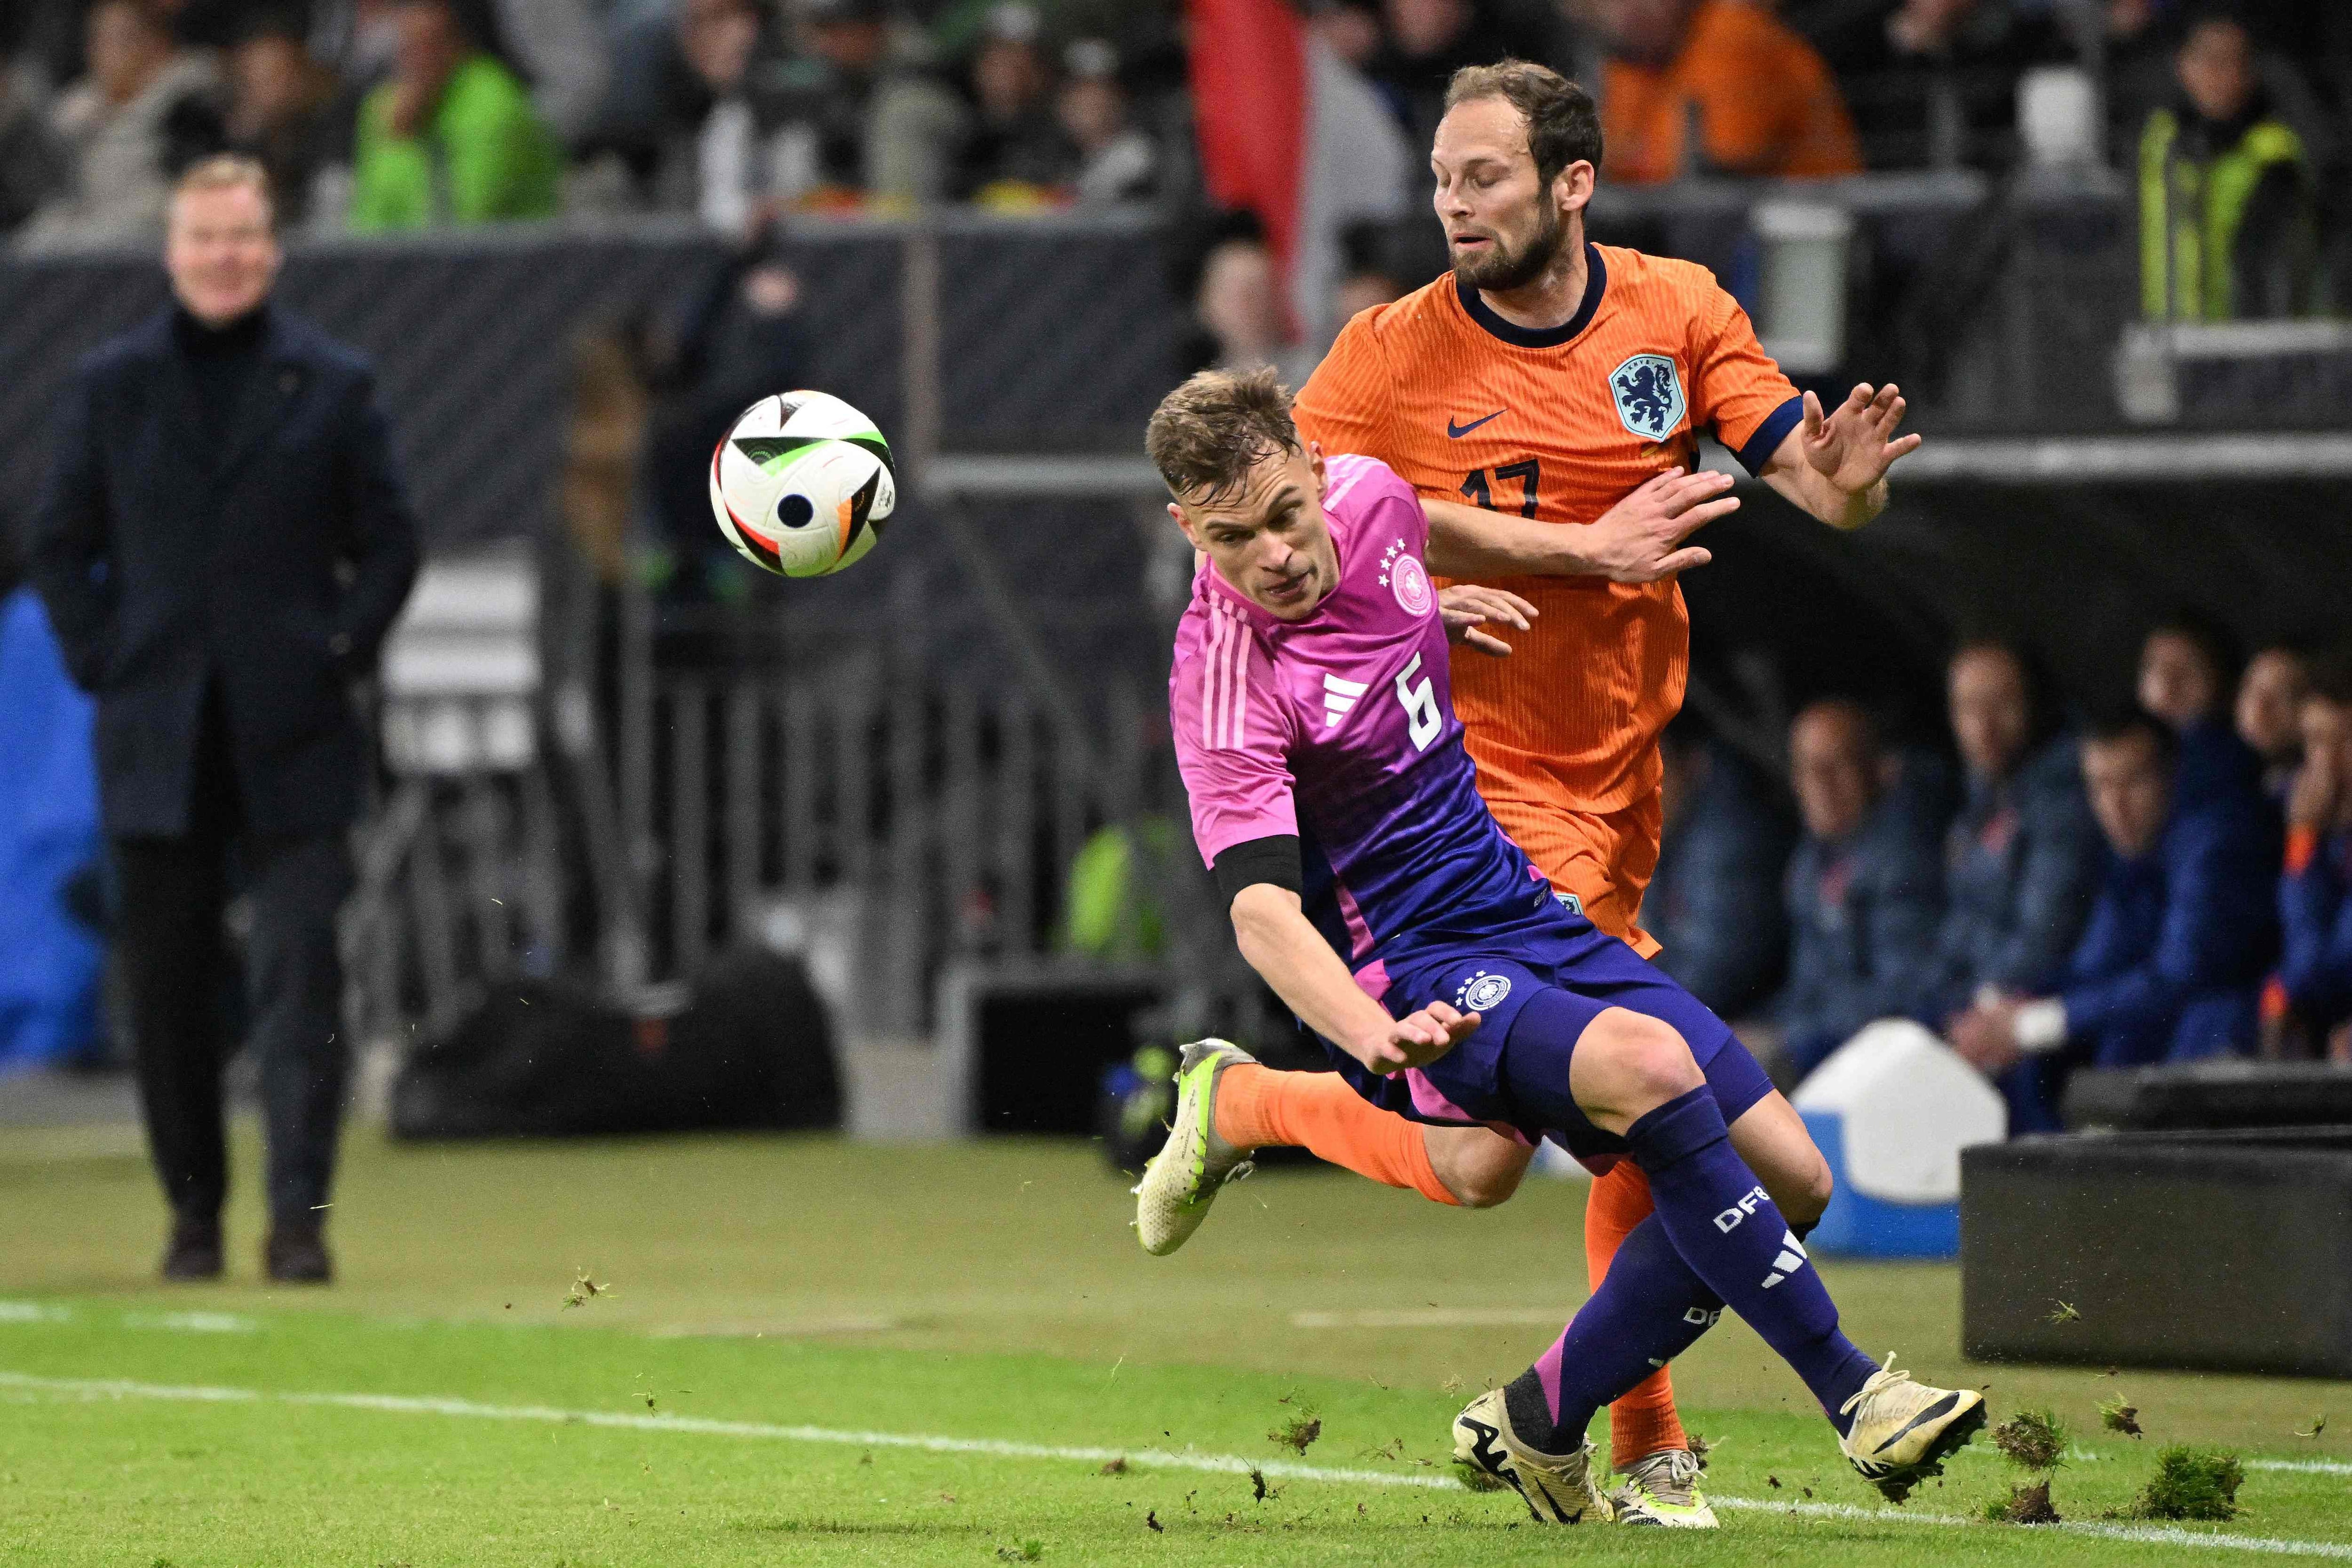 Netherlands' defender #17 Daley Blind (R) and Germany's midfielder #06 Joshua Kimmich vie for the ball during the friendly football match between Germany and Netherlands in Frankfurt, western Germany, on March 26, 2024. (Photo by Kirill KUDRYAVTSEV / AFP)